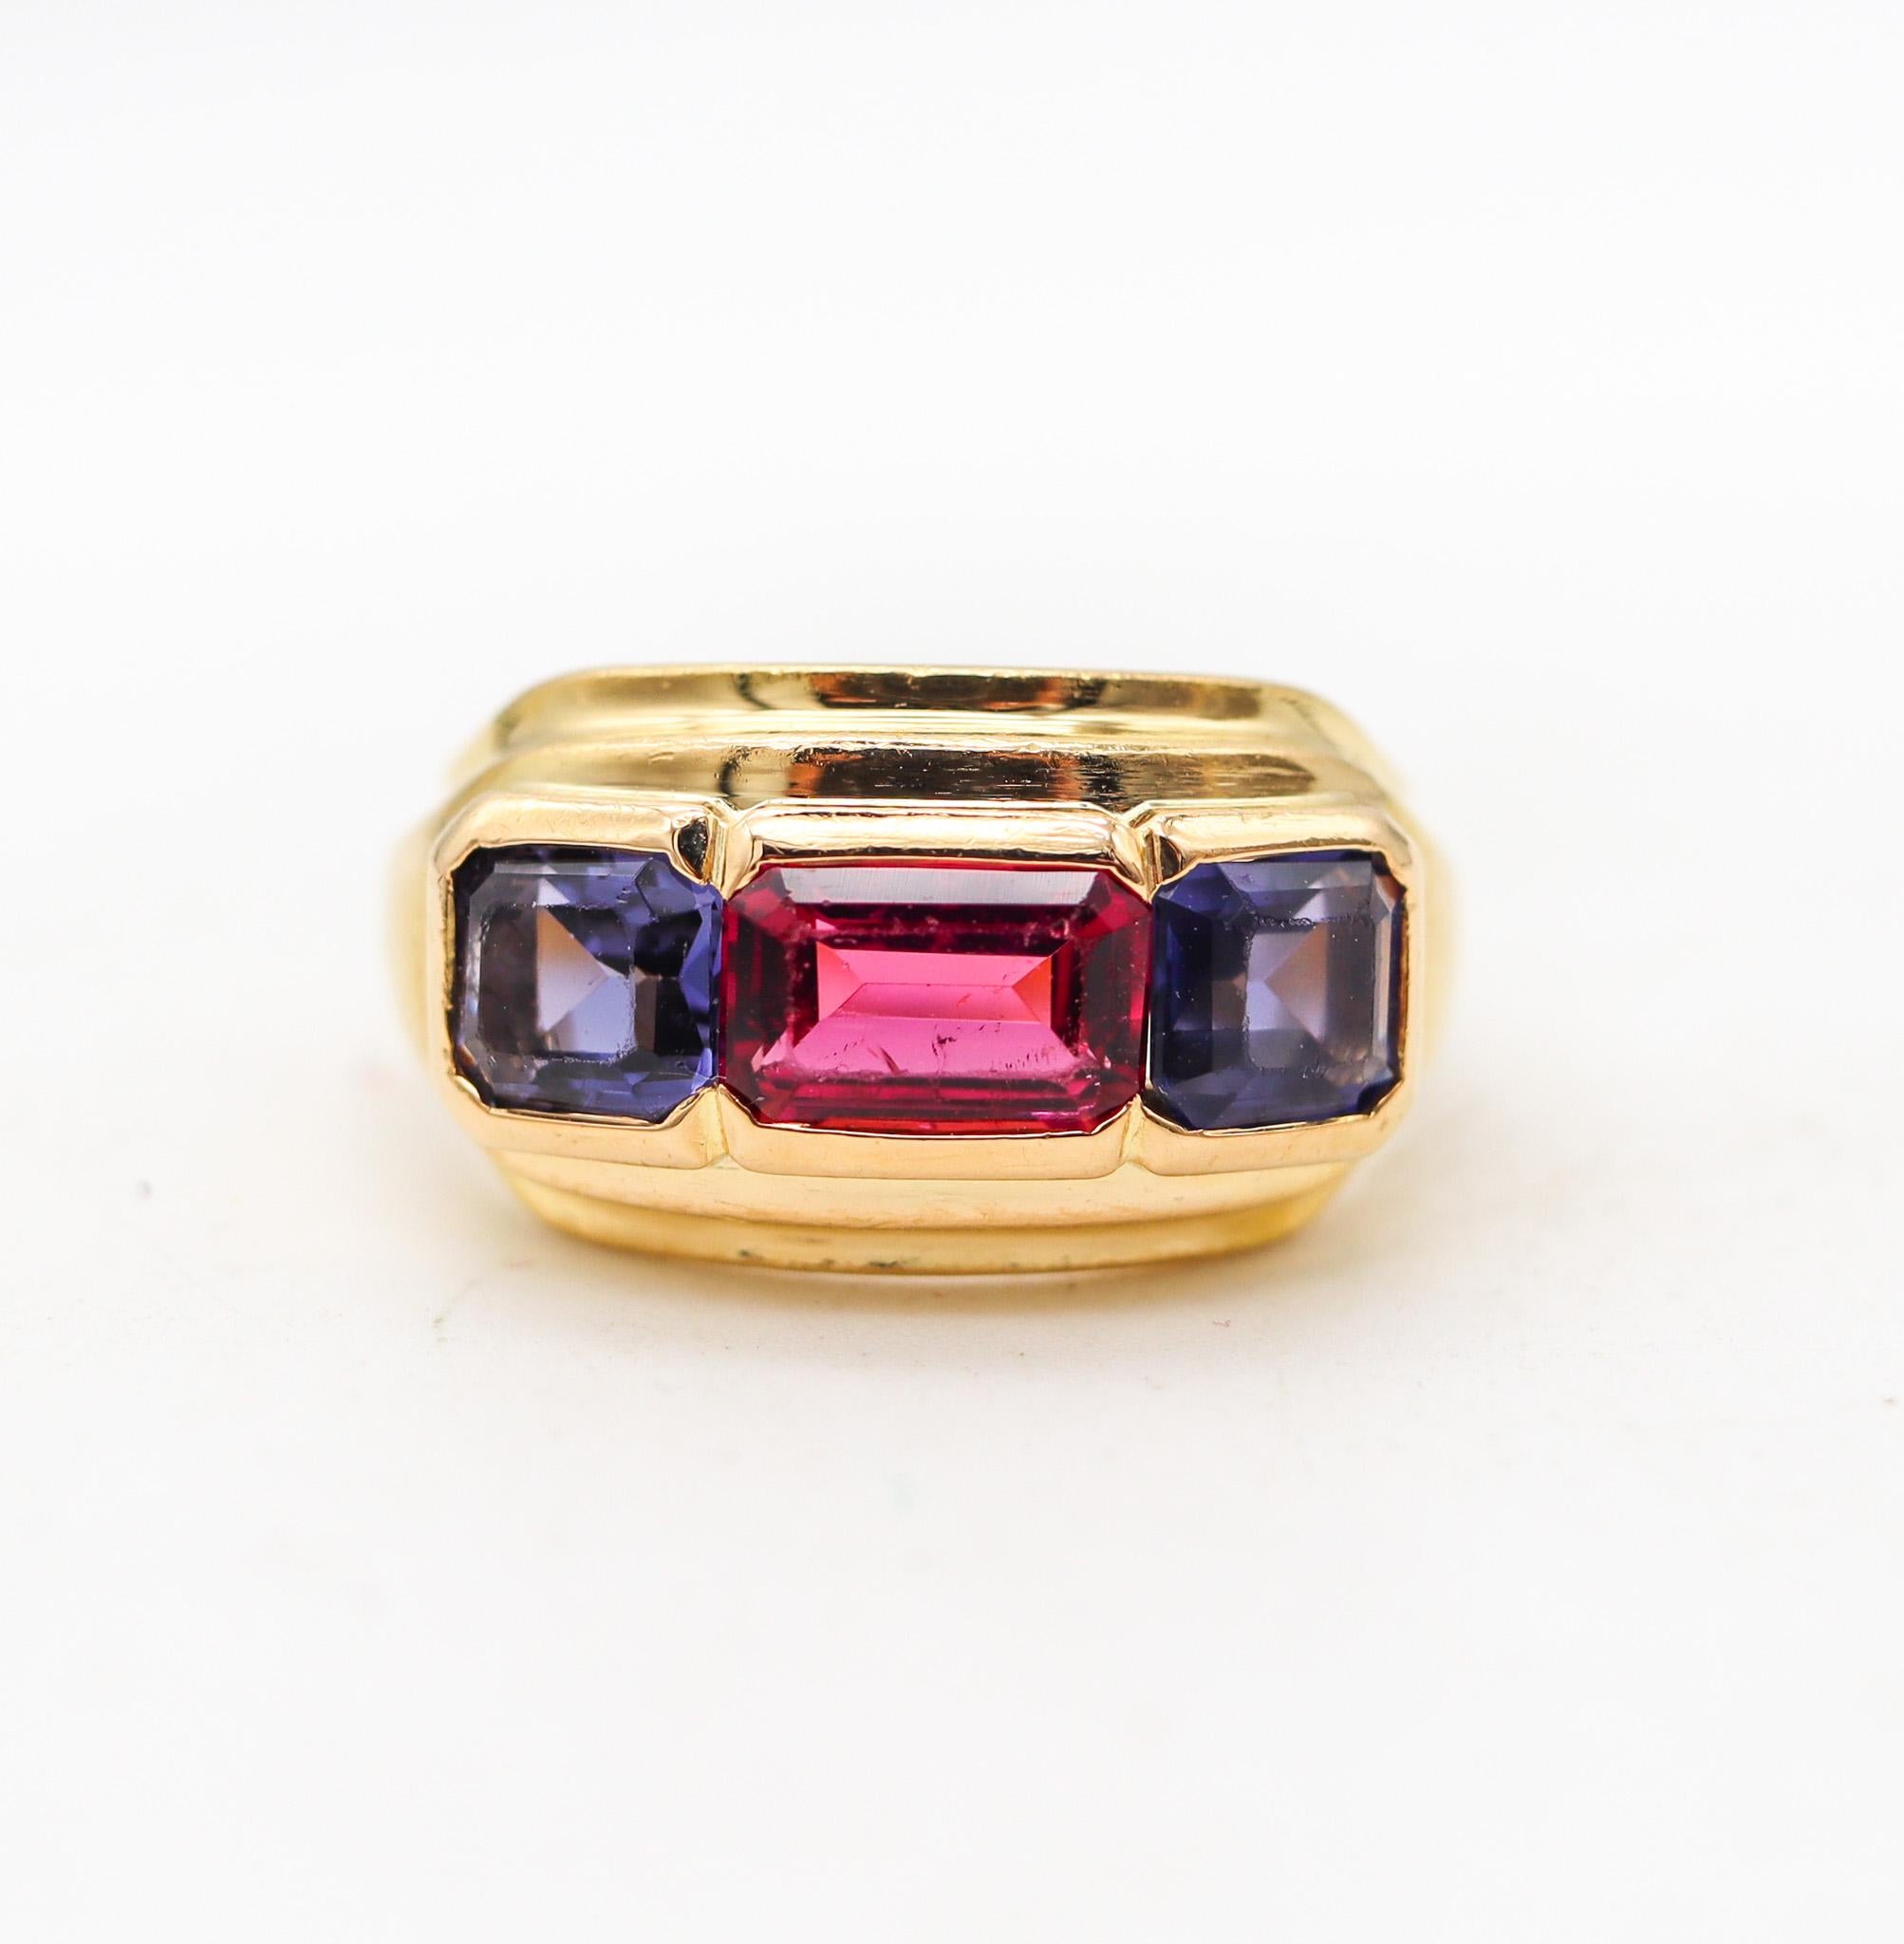 Emerald Cut Bvlgari France Three Gems Ring In 18Kt Gold With 2.18 Ctw In Tourmaline & Iolite For Sale